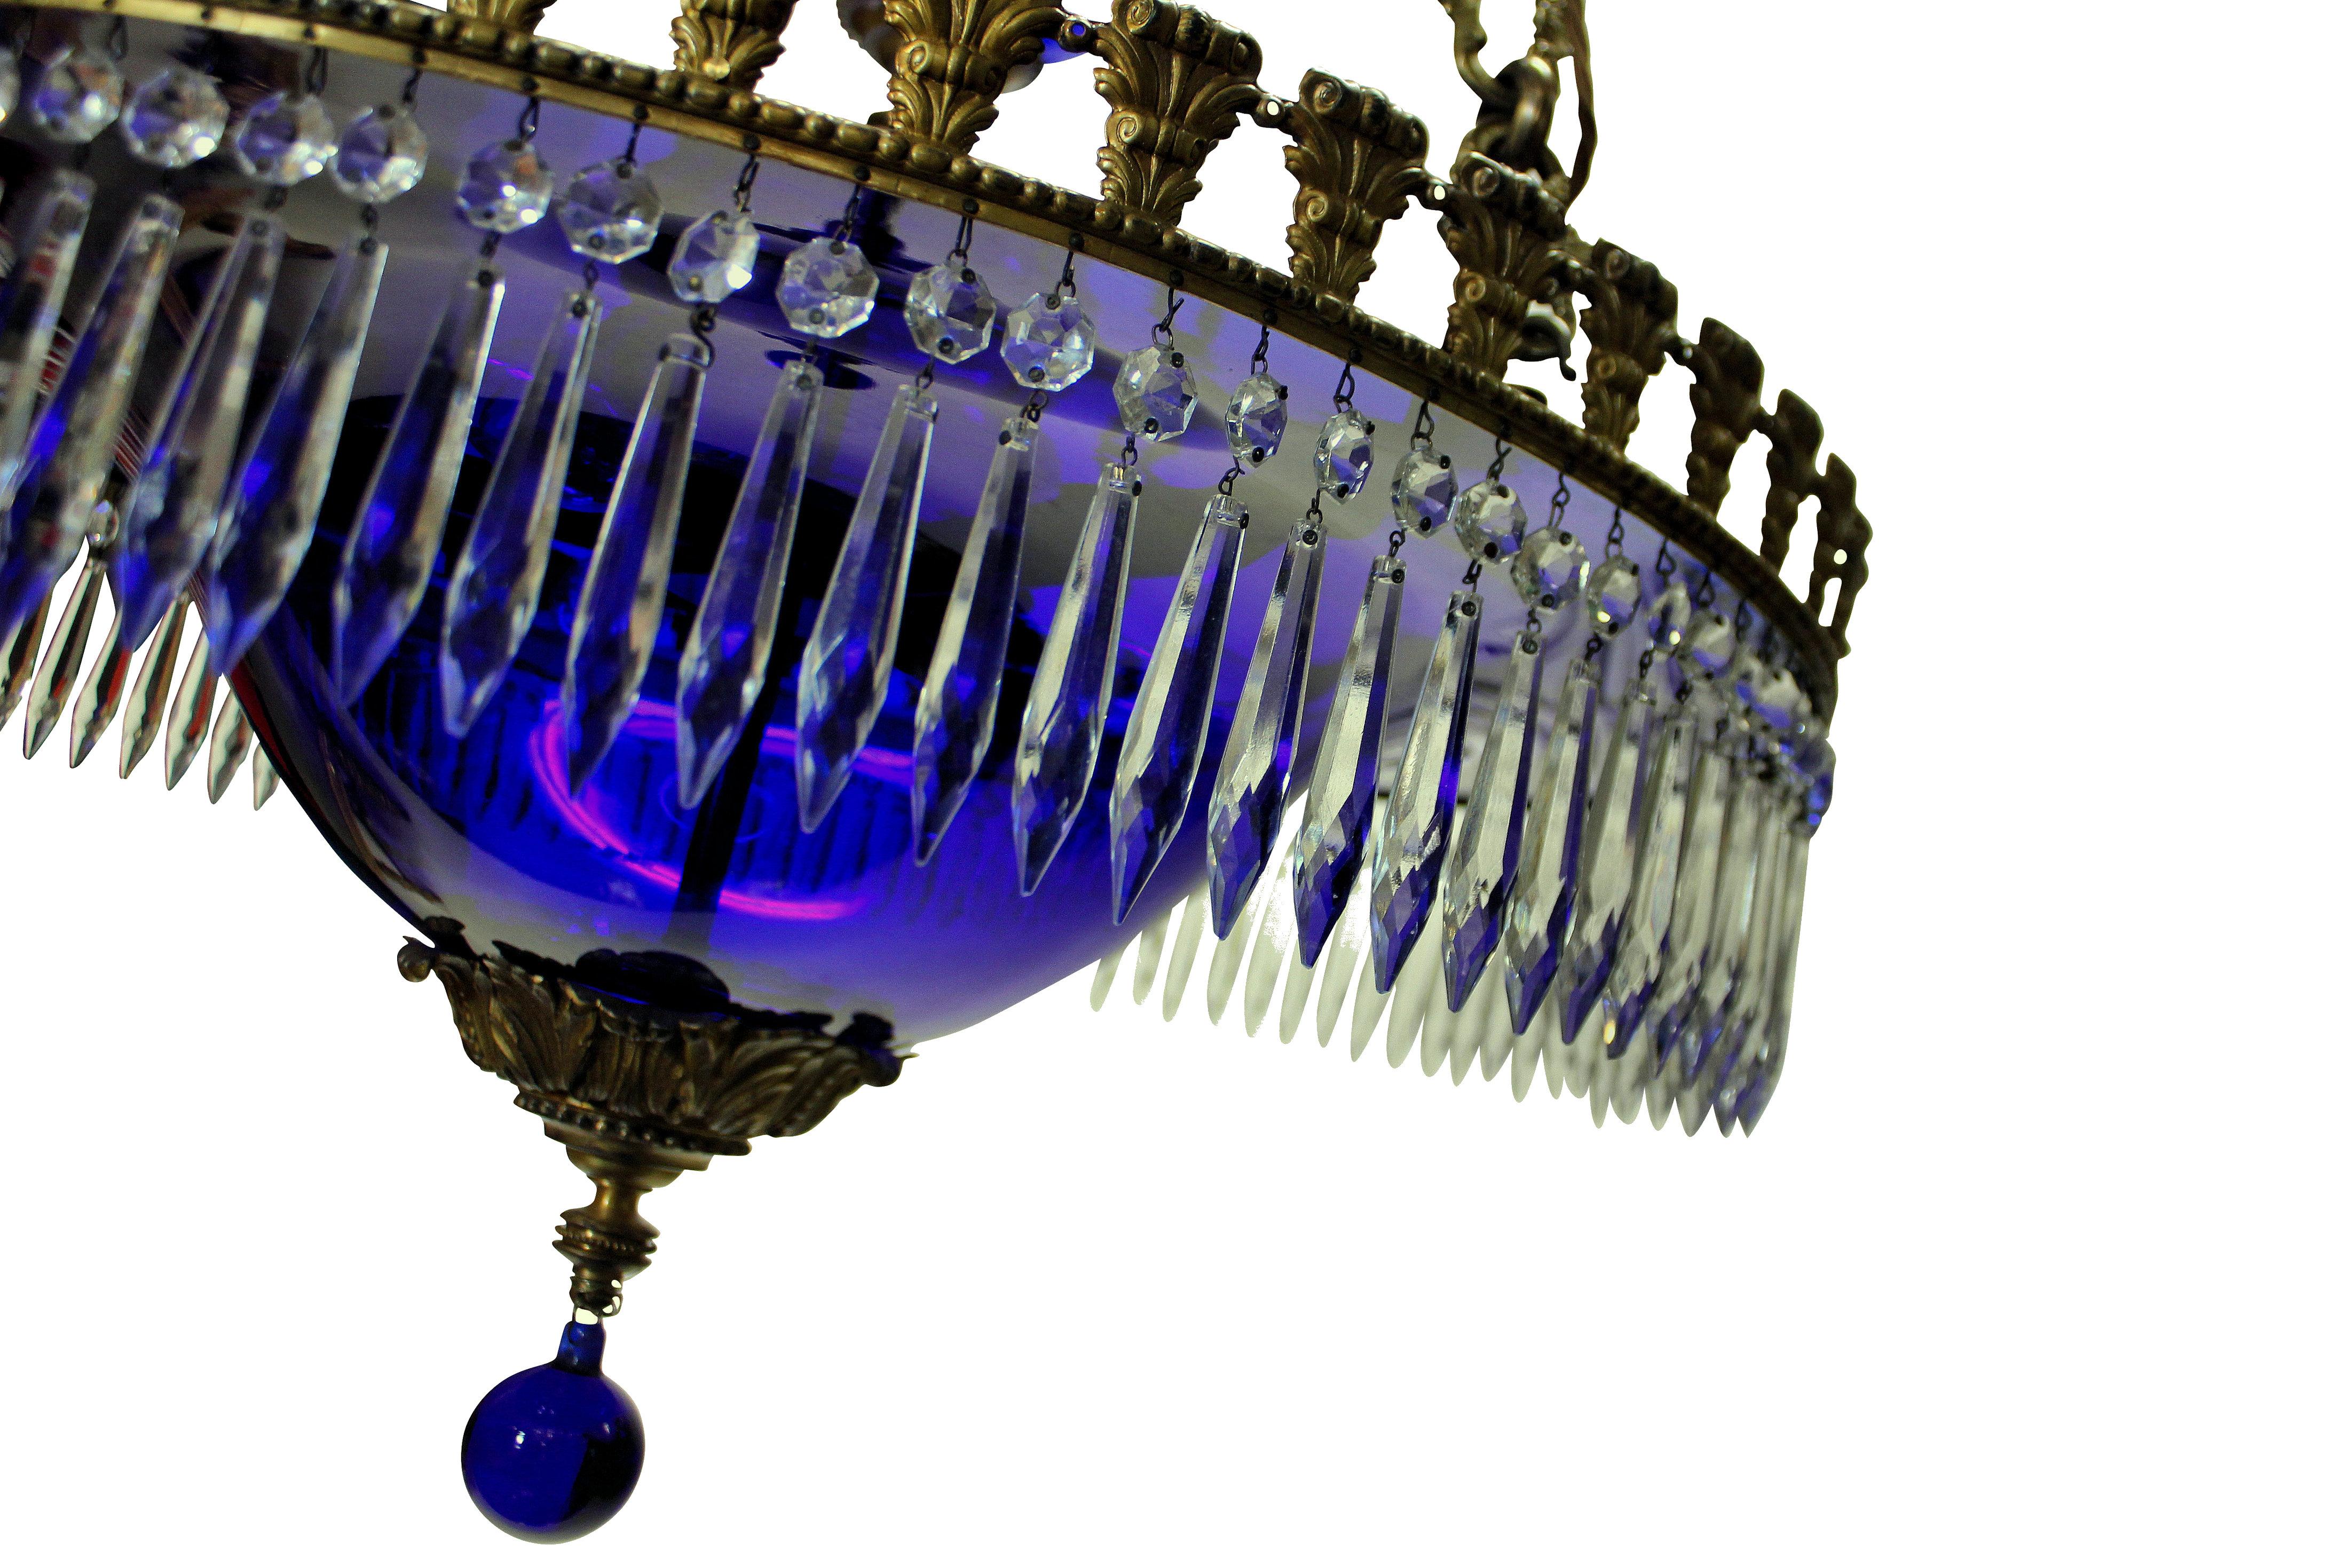 A fine Baltic neoclassical chandelier in blue glass, with gilt bronze frame and hung throughout with cut glass pendants.